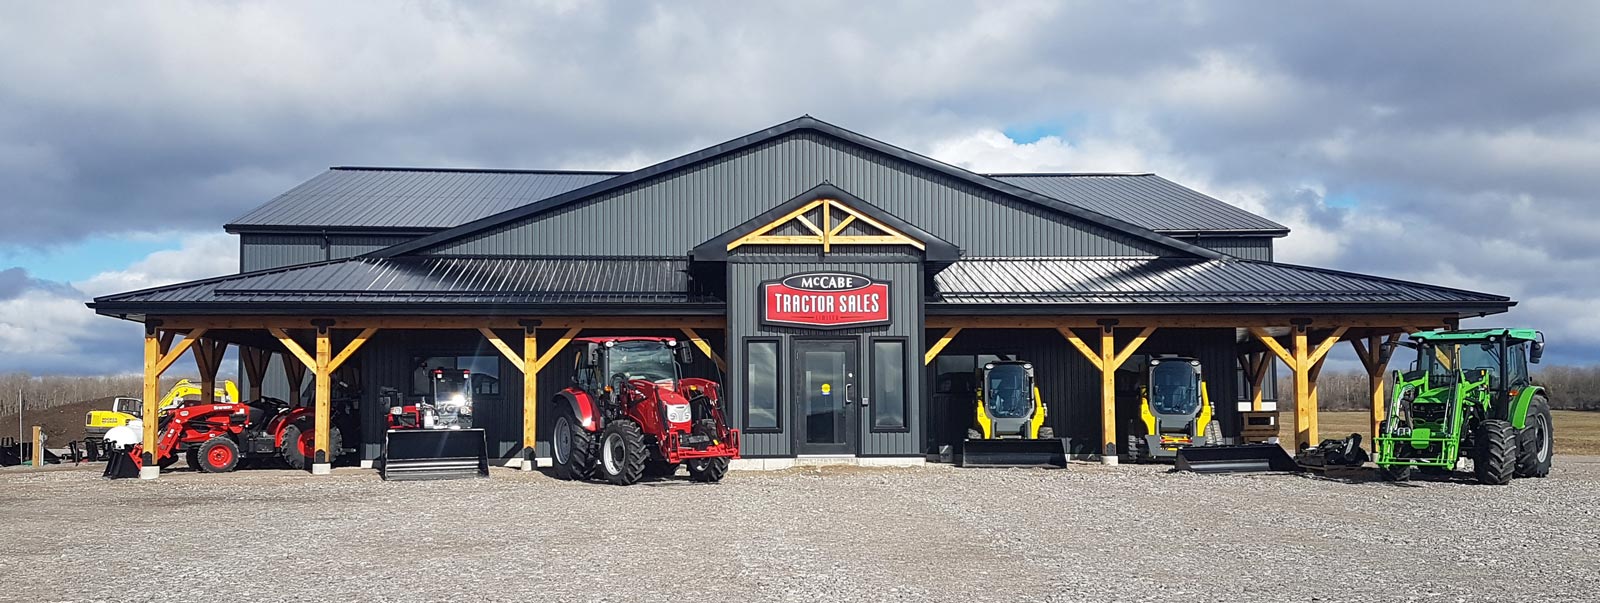 McCabe Tractor Sales Store Front